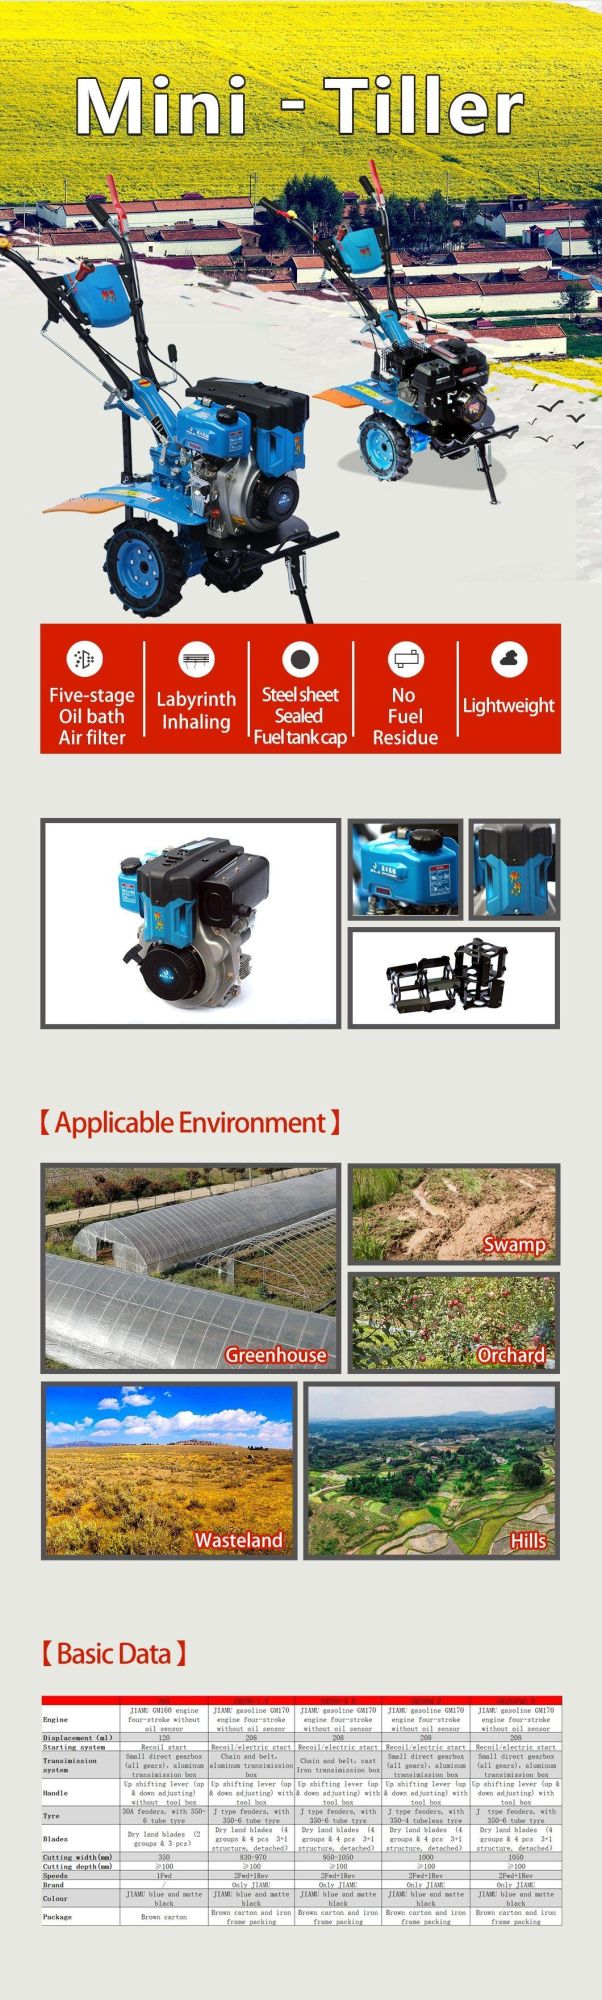 Jiamu GM500-1 D with GM170 All Gear Aluminum transmission Box Agricultural Machinery Petrol D-Style Power Rotary Mini Tiller Hot Sale